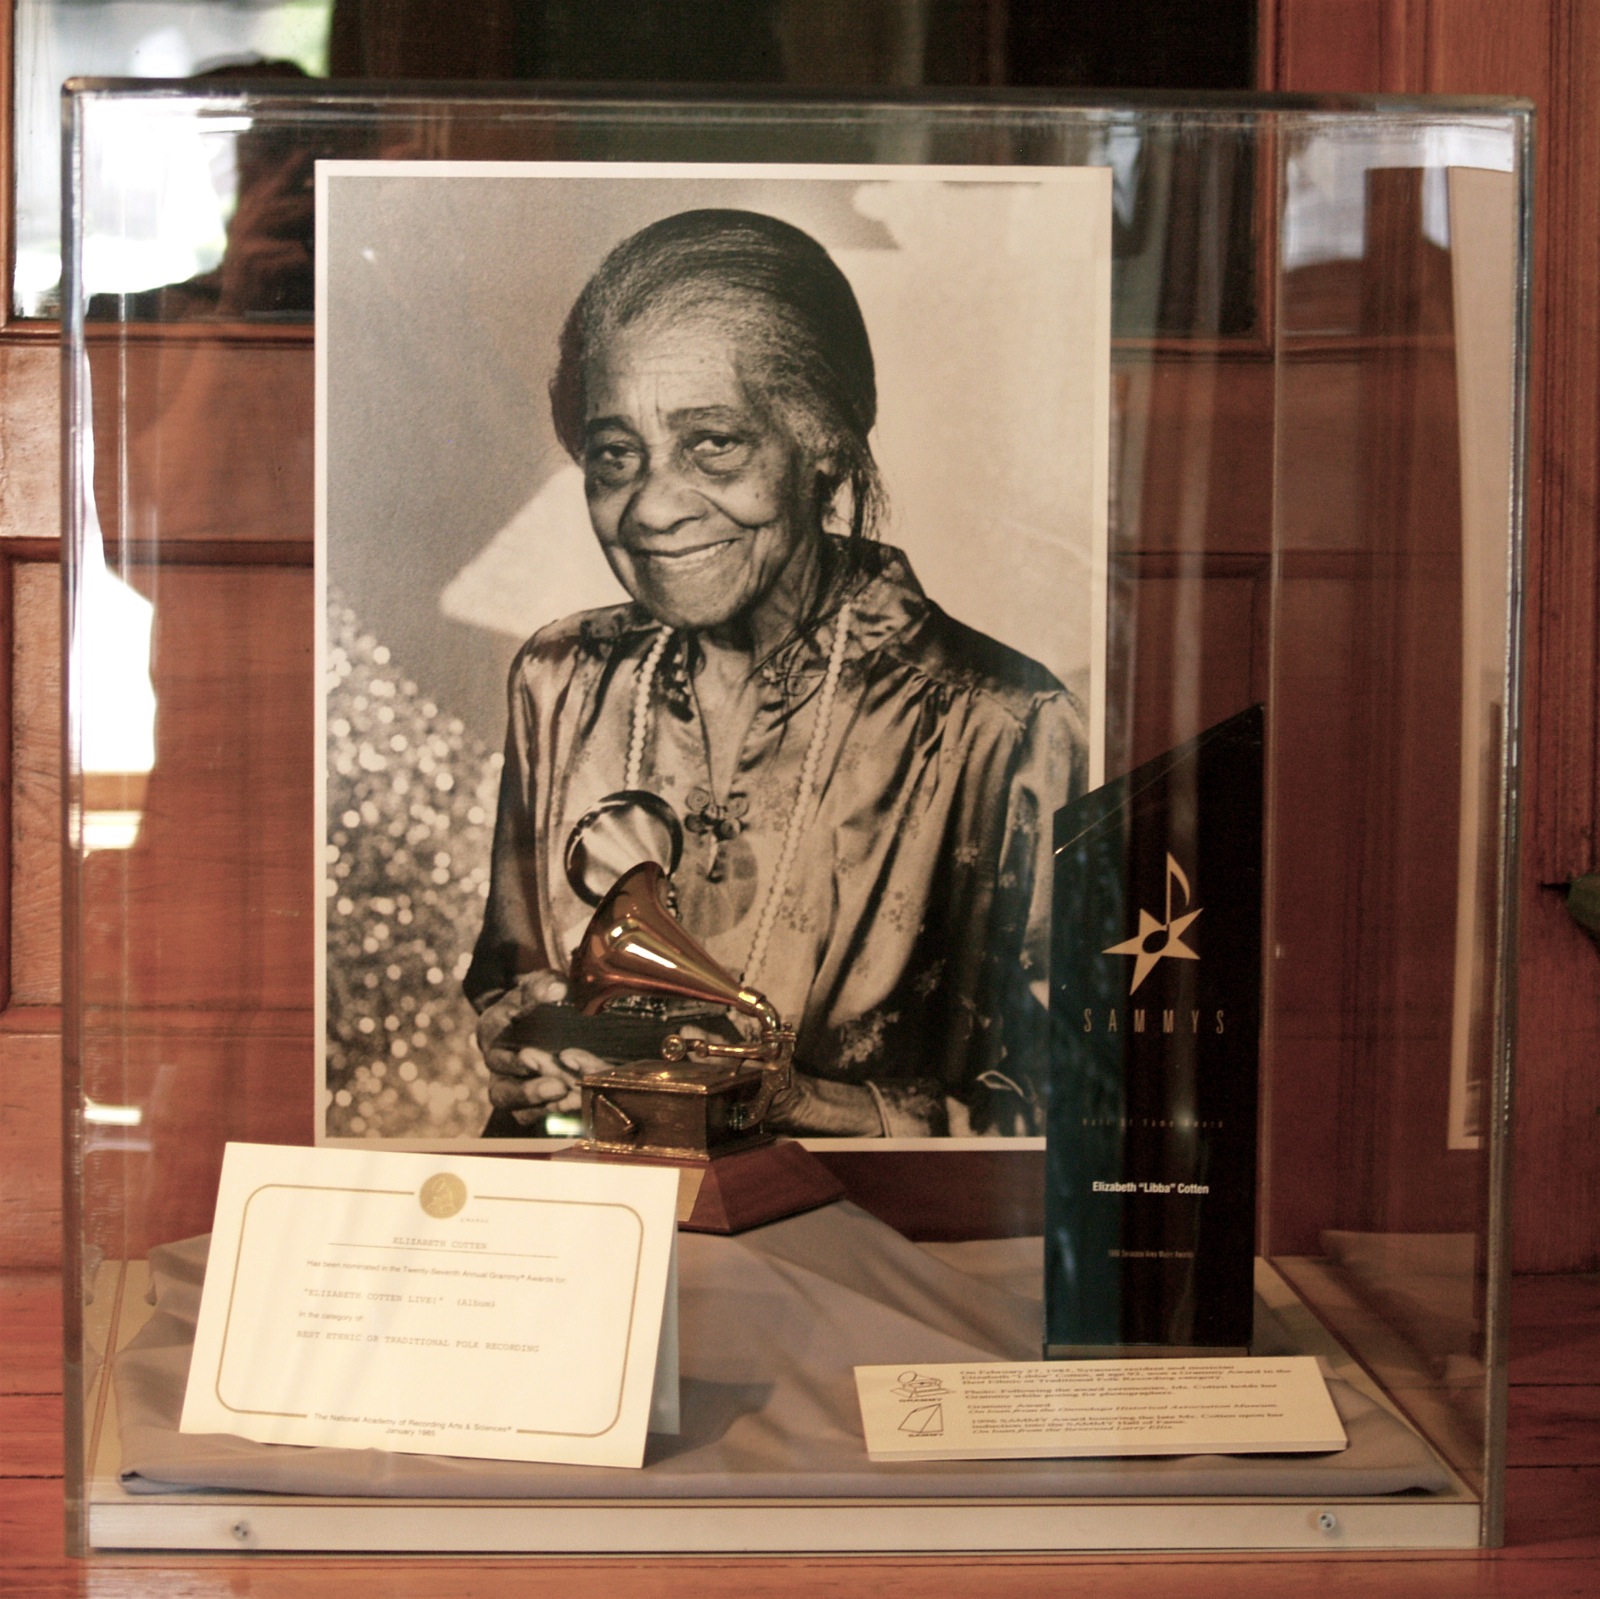 Photo of Elizabeth Cotten with her 1984 Grammy & 1996 Syracuse Area Music Award (Erie Canal Museum: Syracuse, NY)